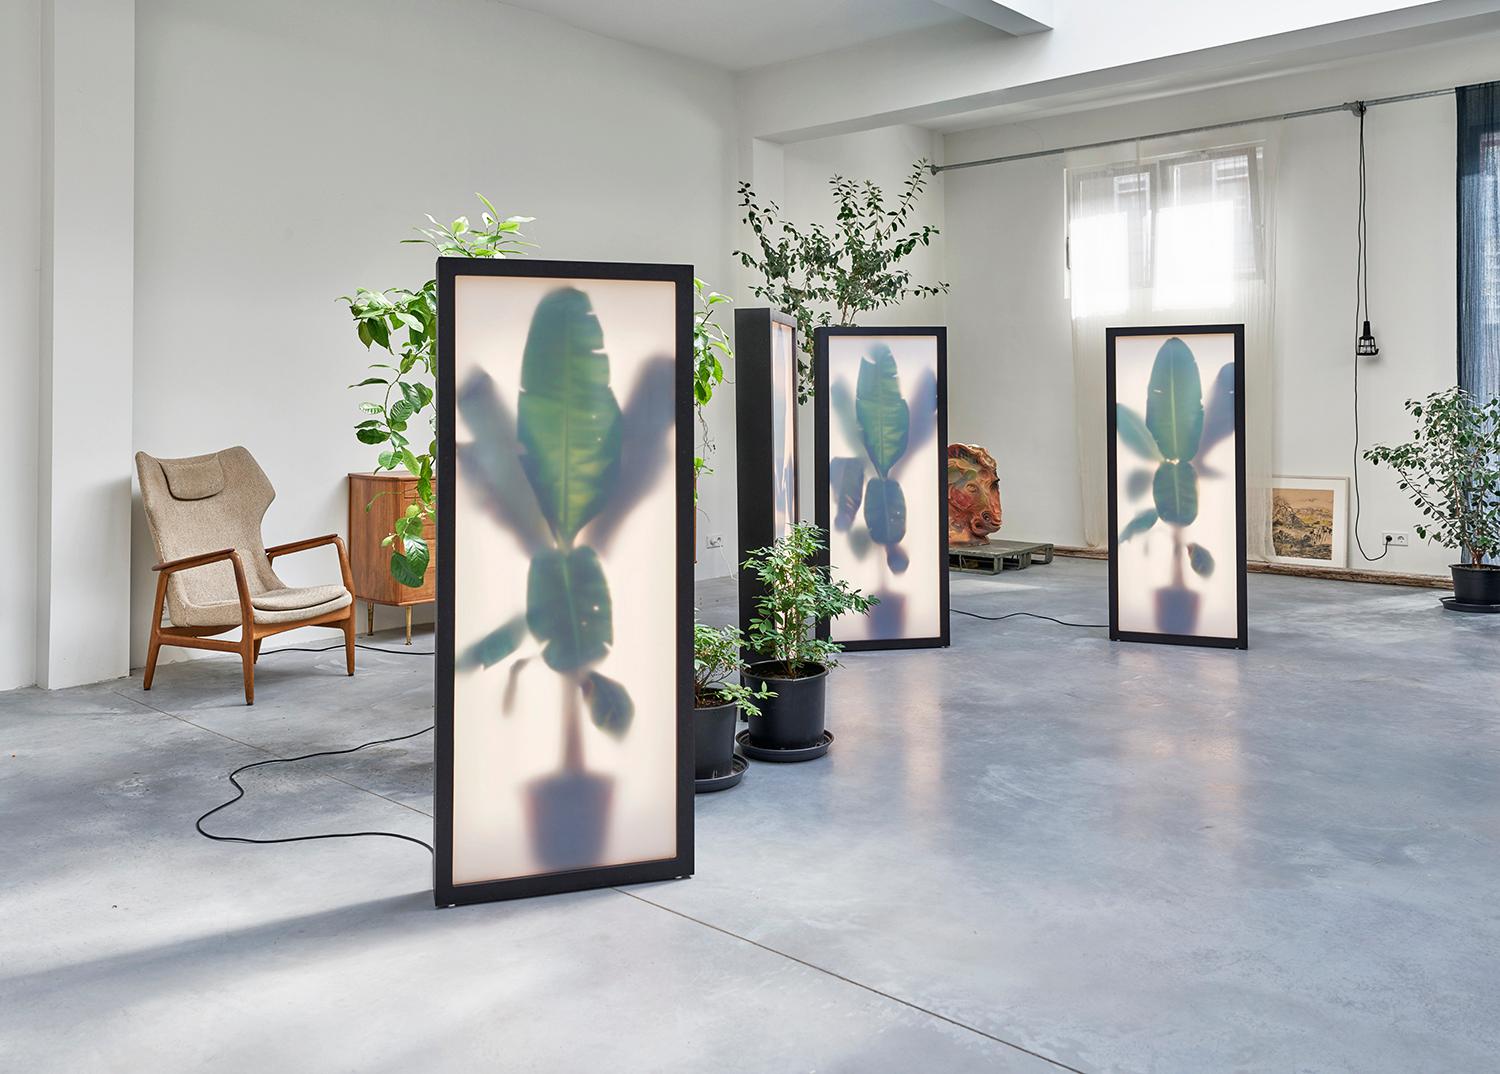 Powder-Coated REM Atelier, Growing Plants Indoors, Light Box with Photographic Collage, 2018 For Sale